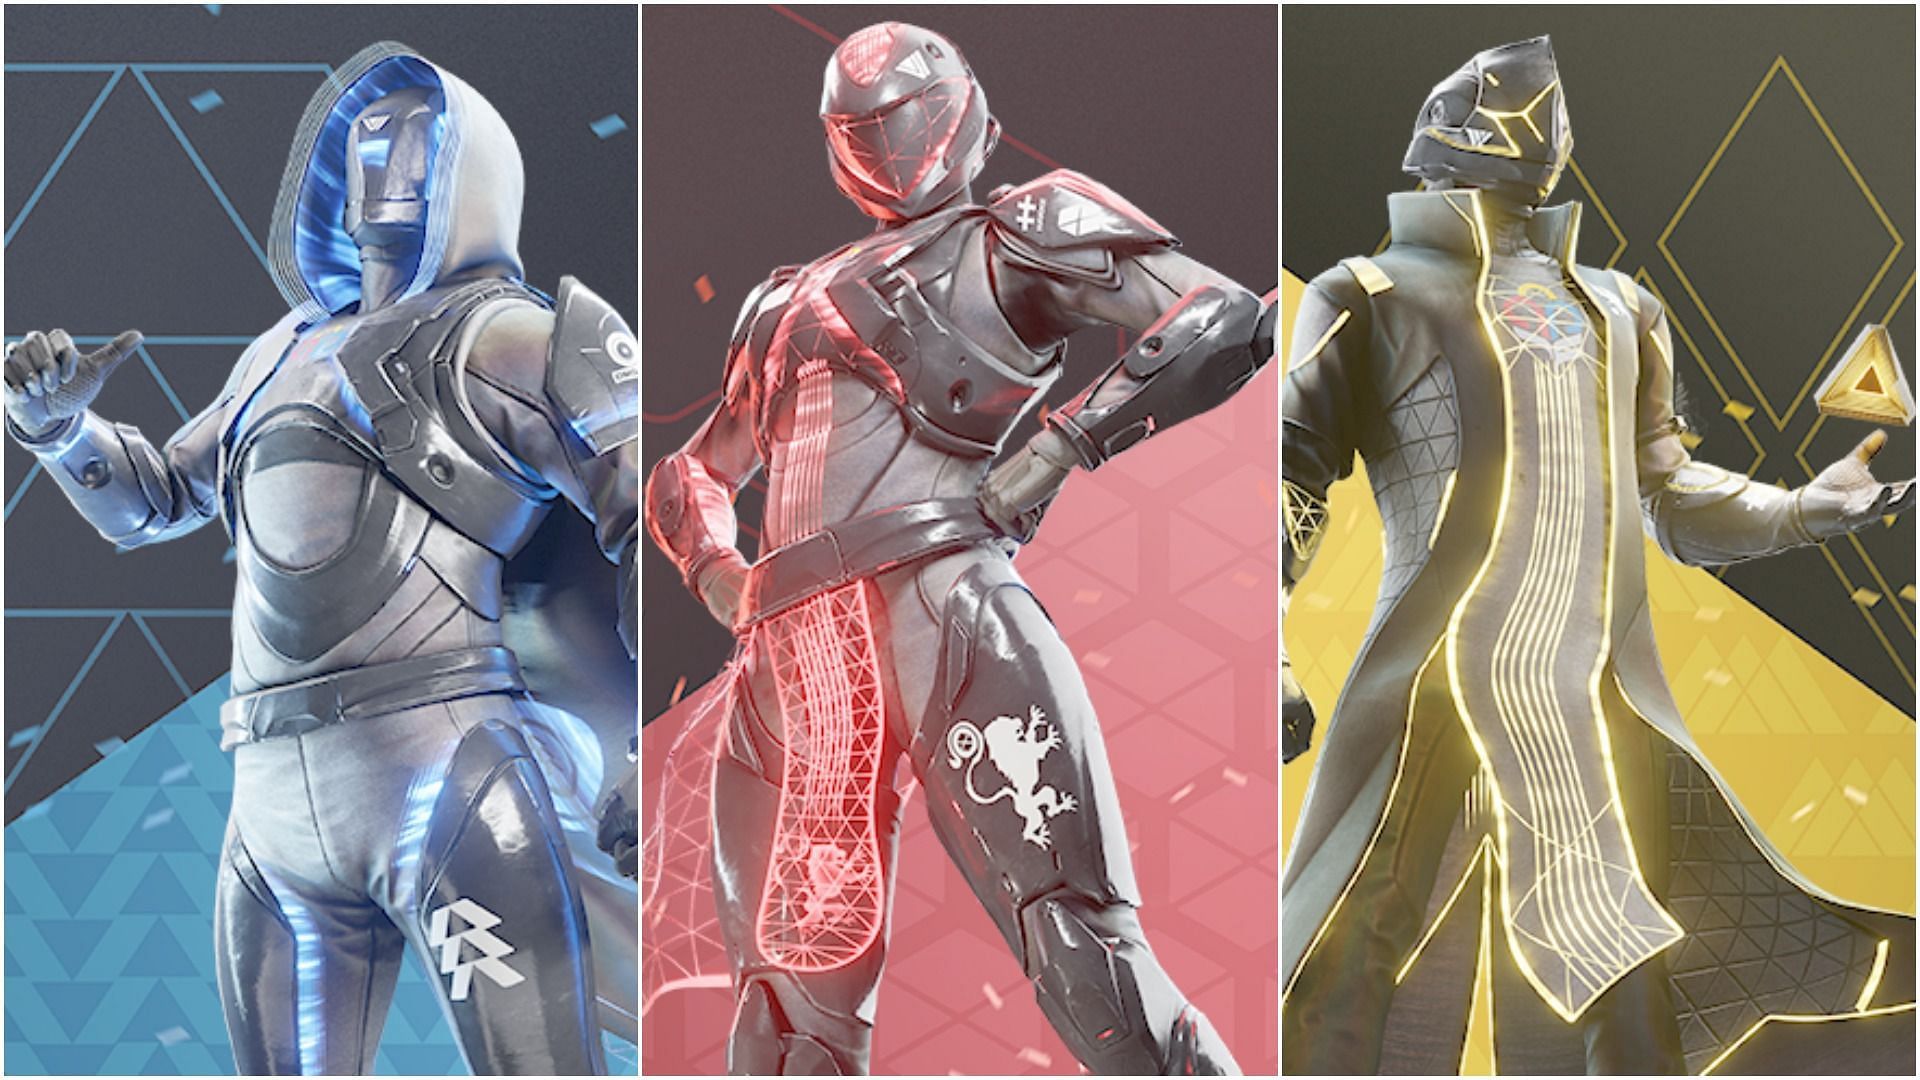 Leaked armor set for all three classes in Destiny 2 (Image via Bungie)